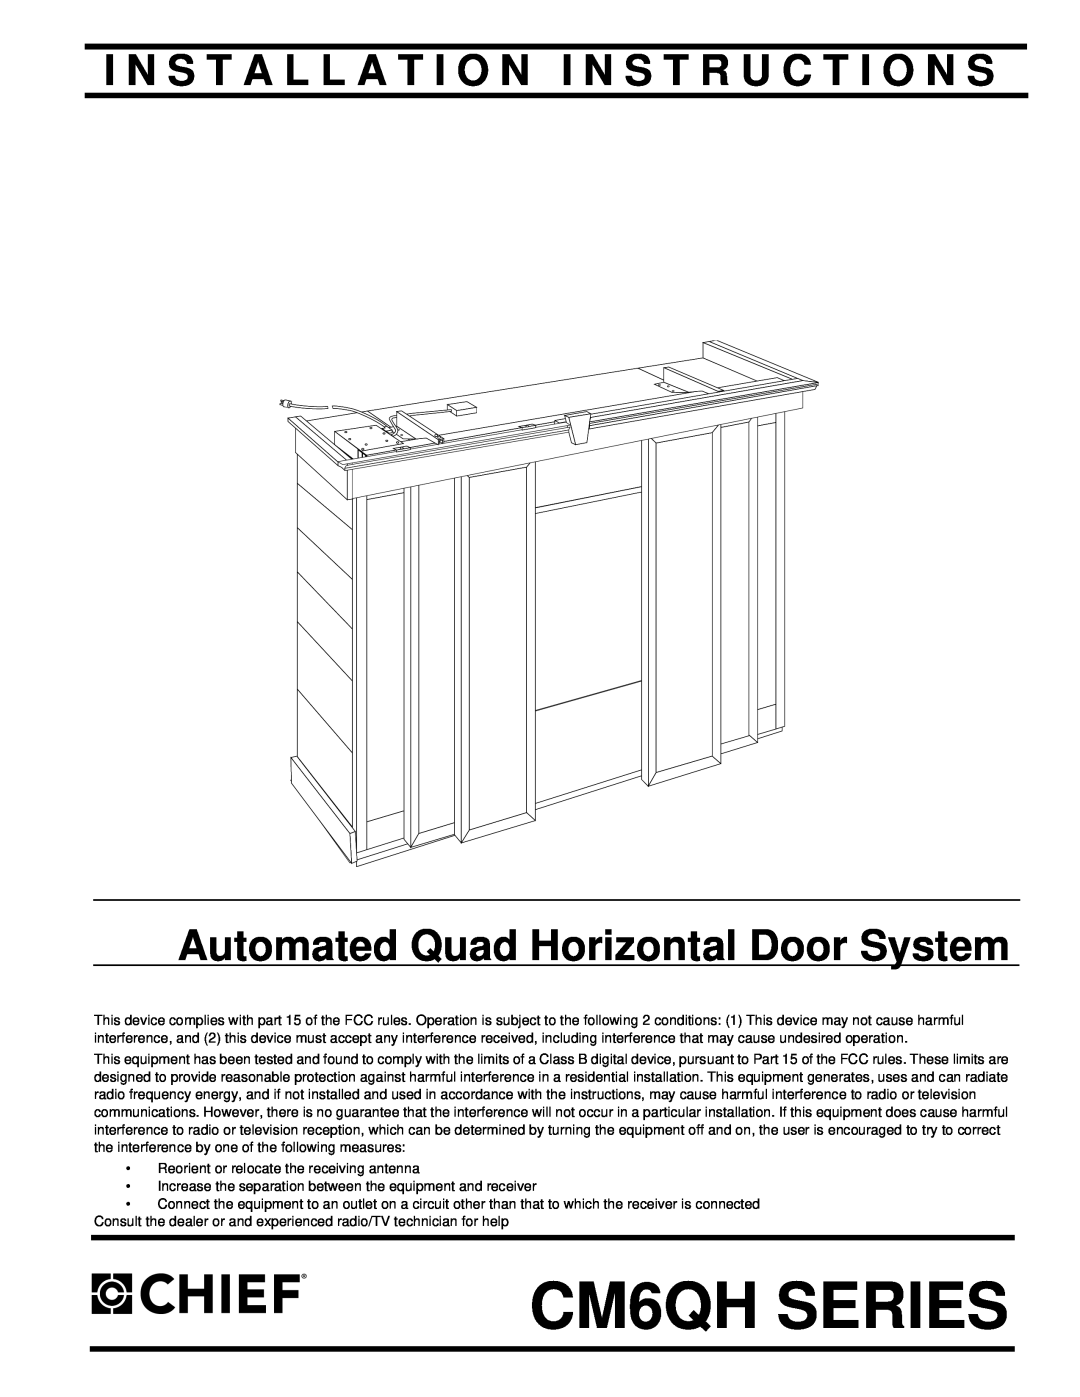 Chief Manufacturing CM6QH SERIES installation instructions I N S T A L L A T I O N I N S T R U C T I O N S 